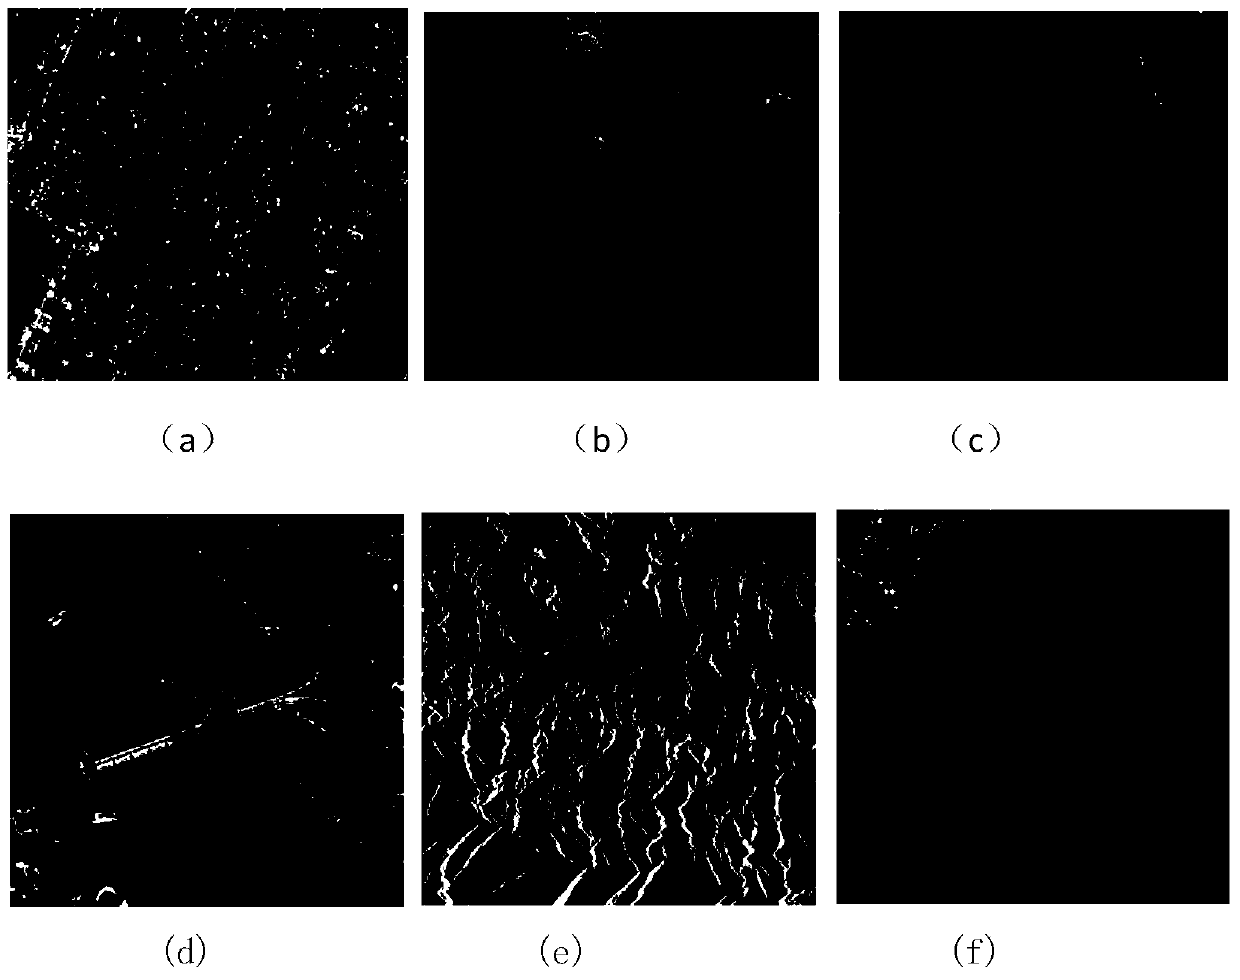 SAR Image Classification Method Based on Hierarchical Sparse Filter Convolutional Neural Network